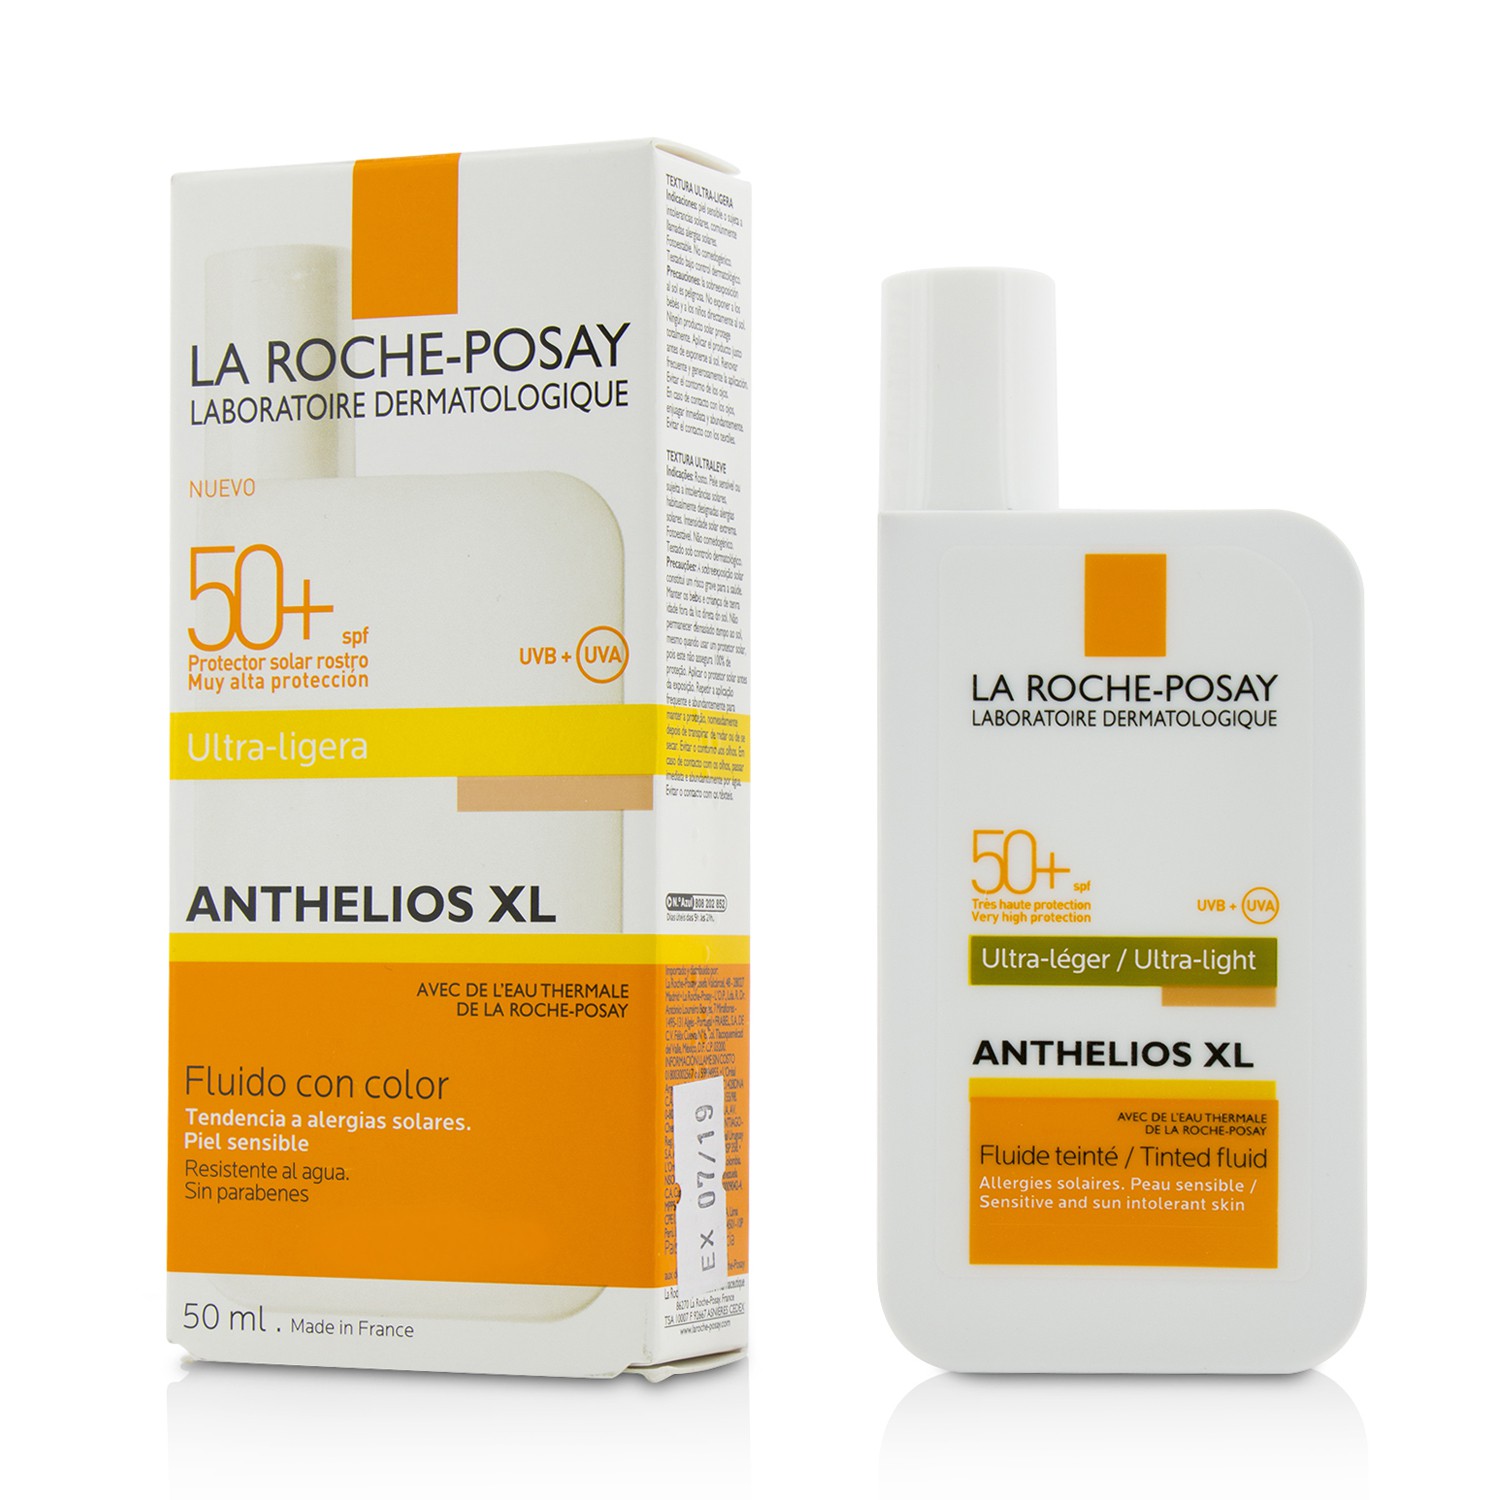 Anthelios XL Tinted Ultra-Light Fluid SPF50+ La Roche Posay Image